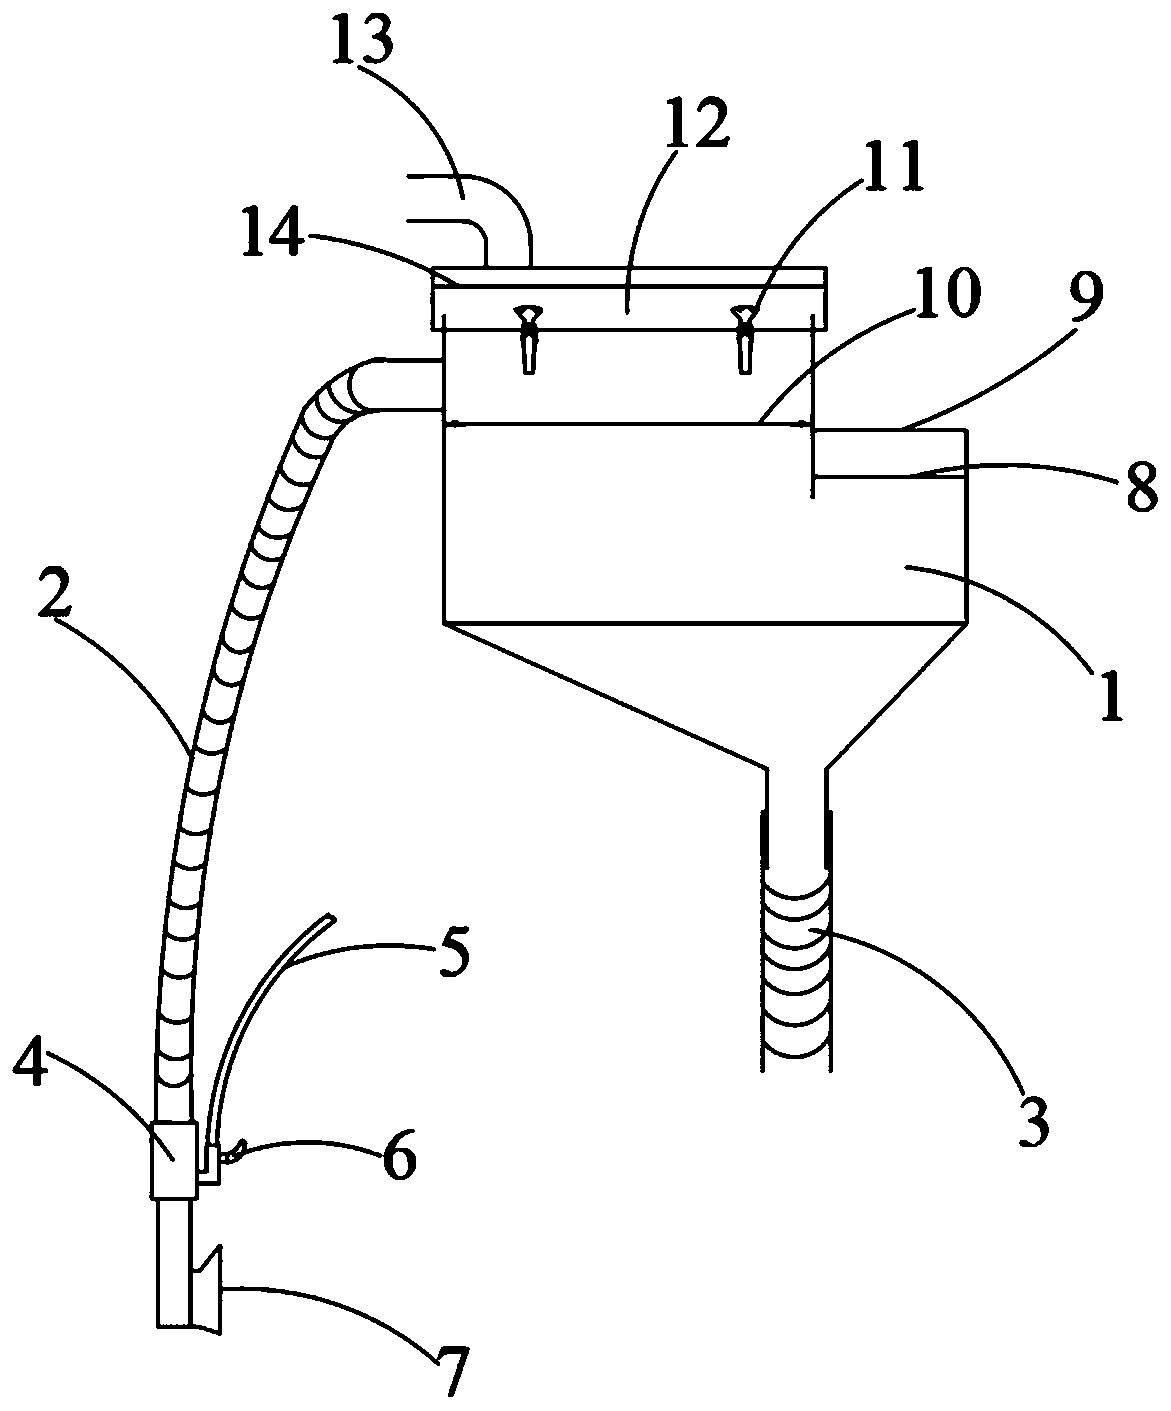 Welding device for synchronously recycling welding flux